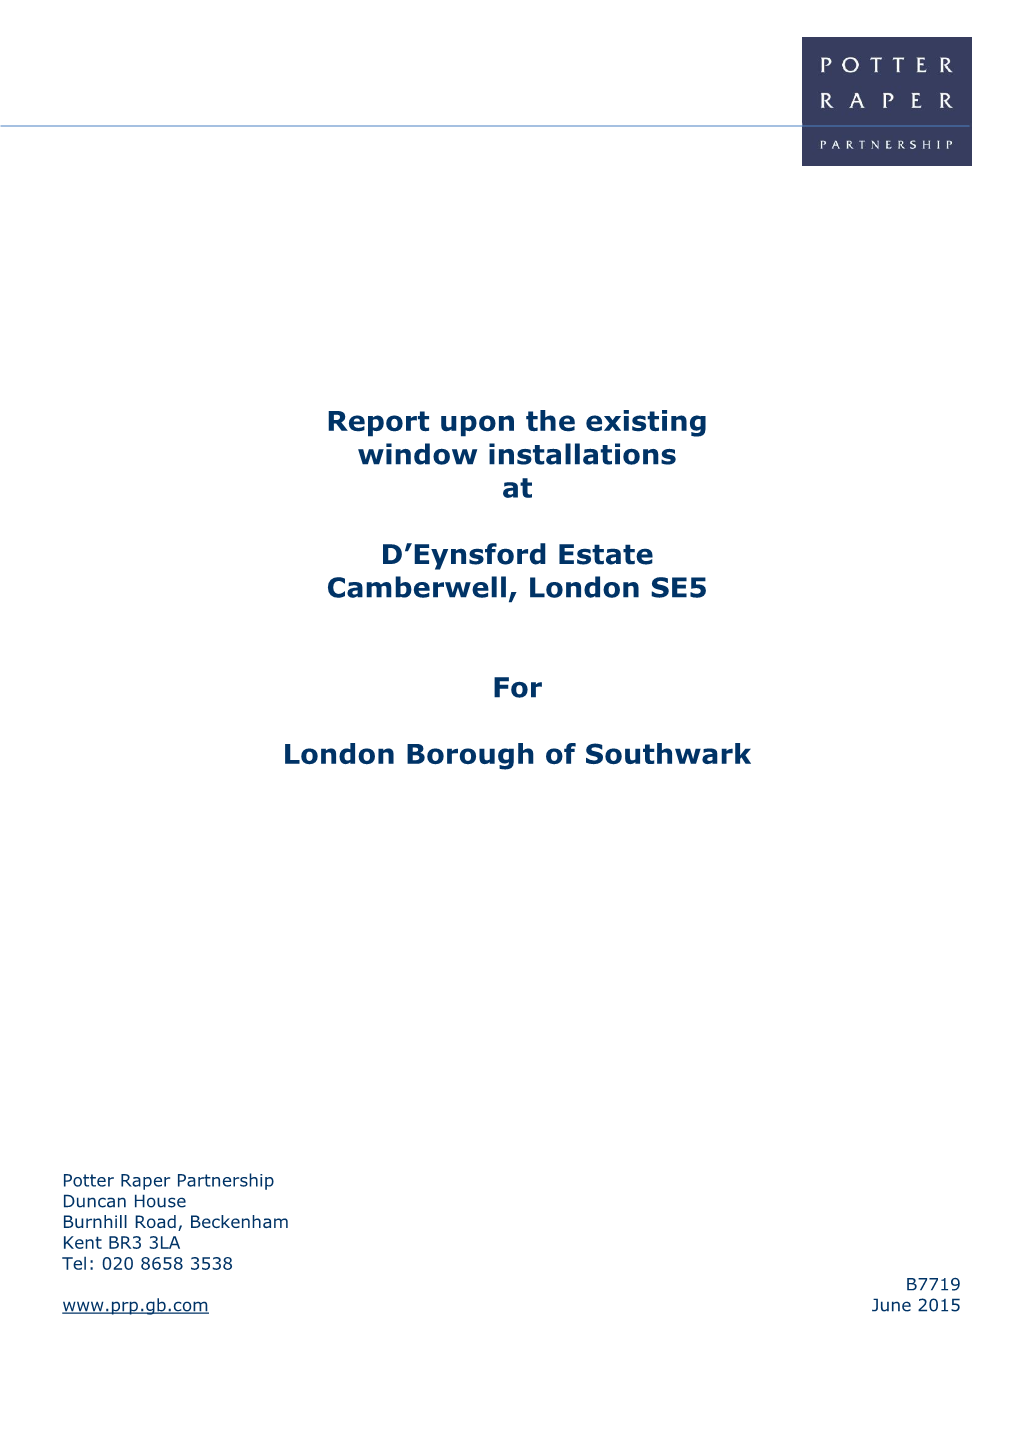 Report Upon the Existing Window Installations at D'eynsford Estate Camberwell, London SE5 for London Borough of Southwark